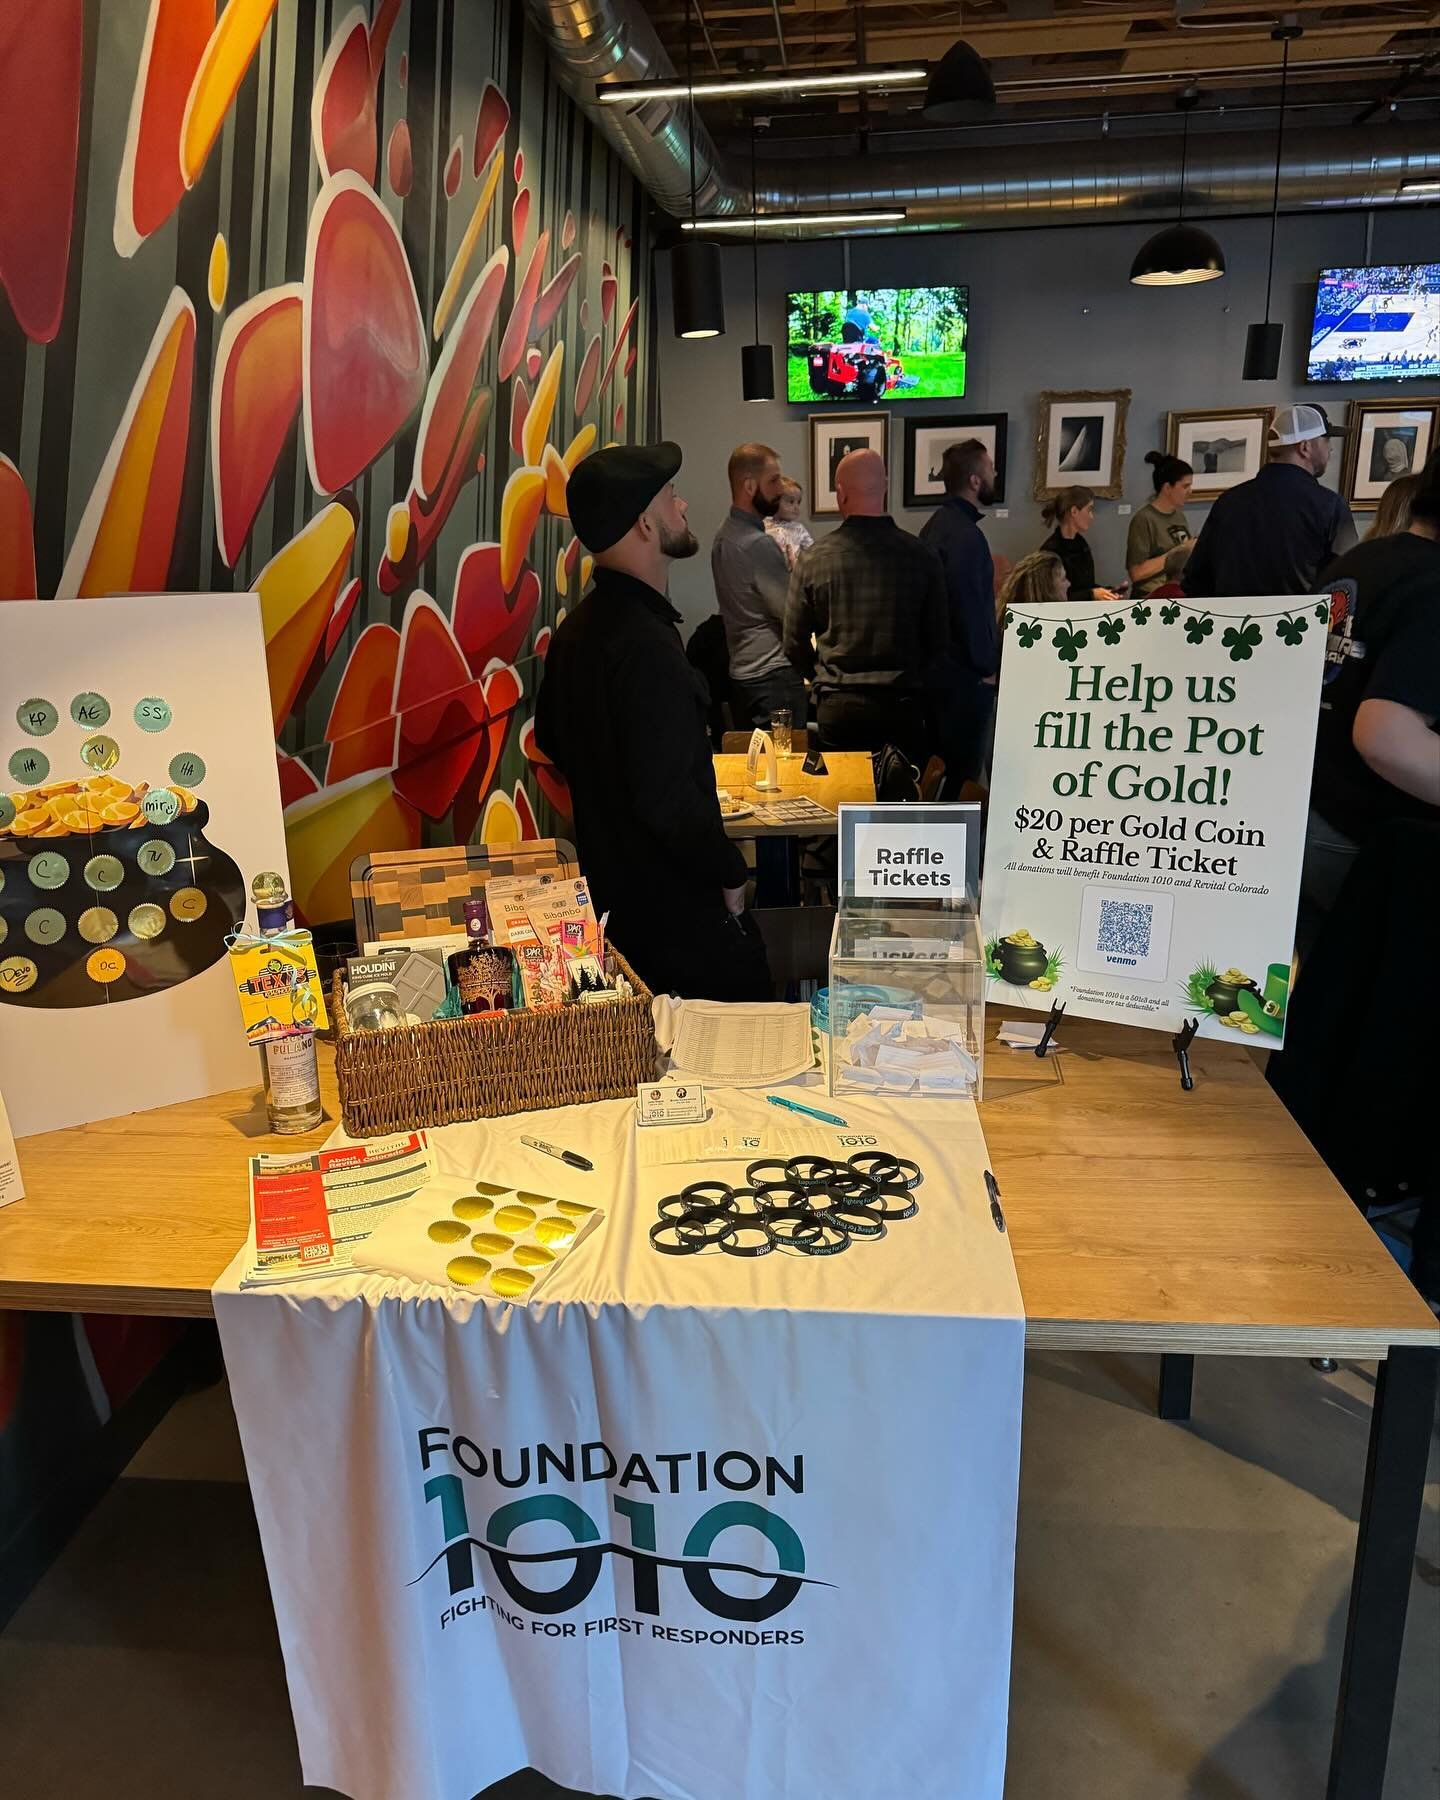 We attending a fun bingo fundraiser last week put on by @foundation10_10 to support first responders and their families. We are so thankful for our partnerships with other amazing organizations like this who want to make an impact in the responder co